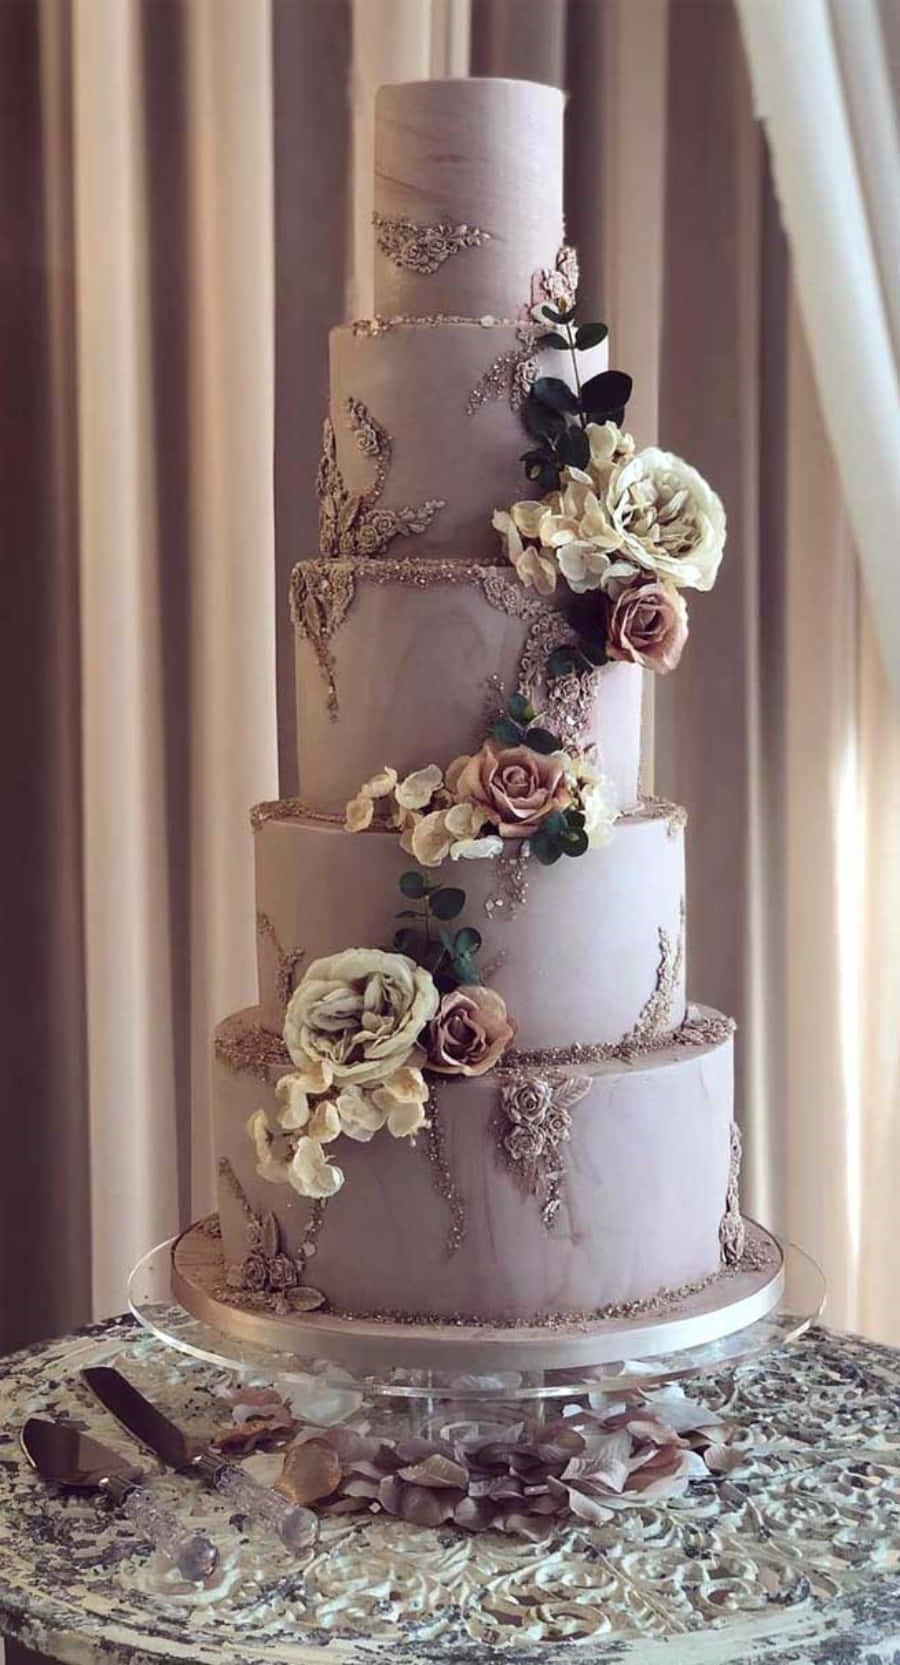 "Celebrate your wedding with a delicious, beautiful cake!"